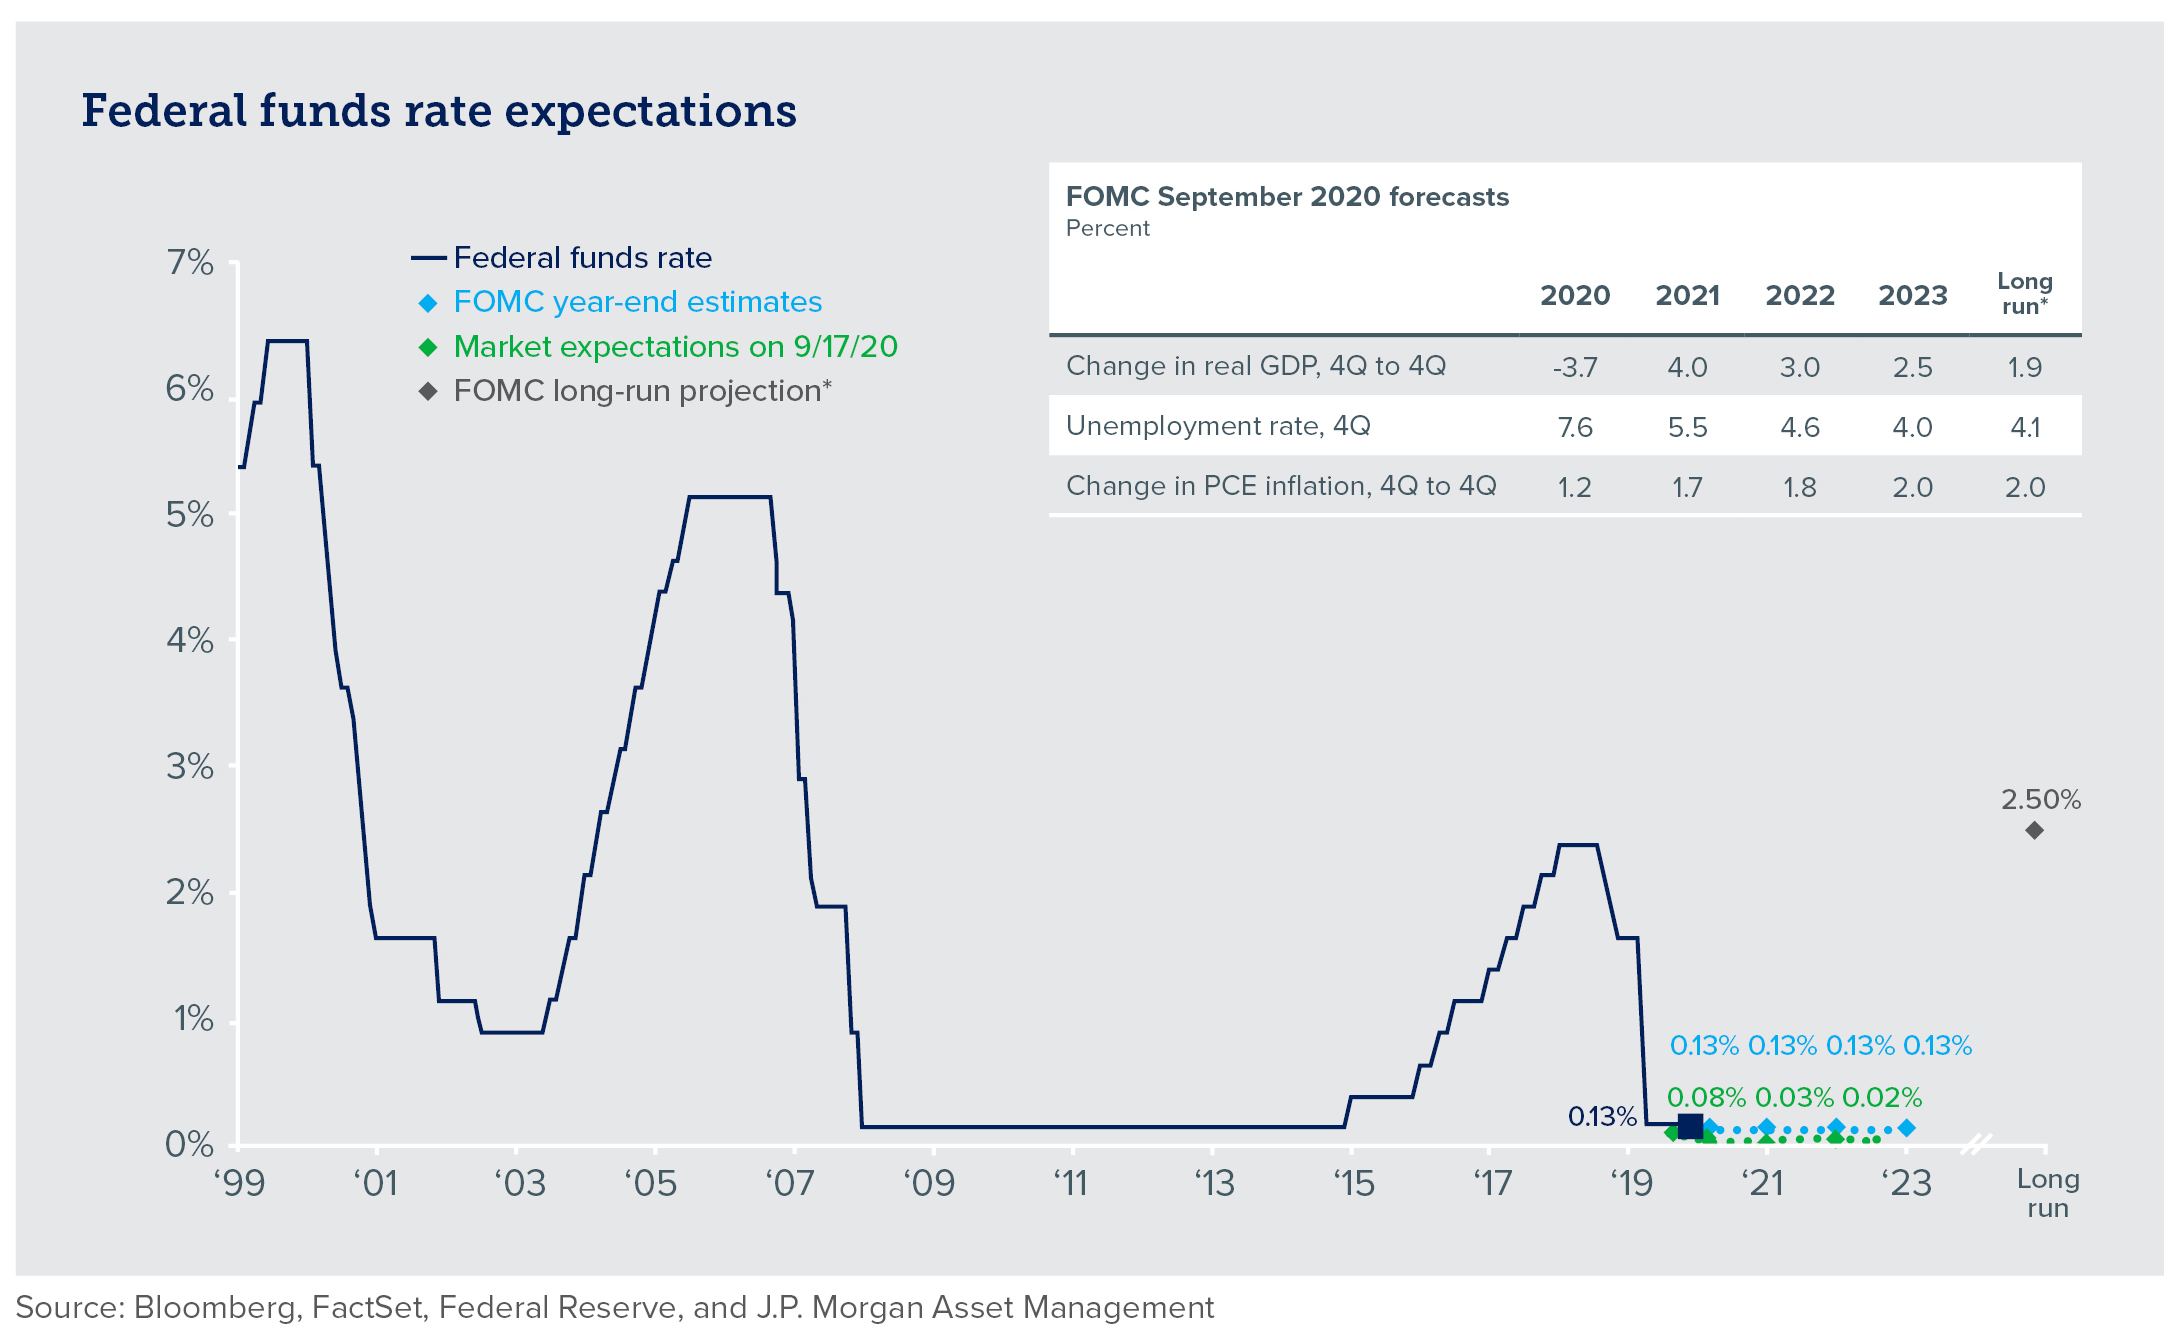 Chart of federal funds rate expectations over time